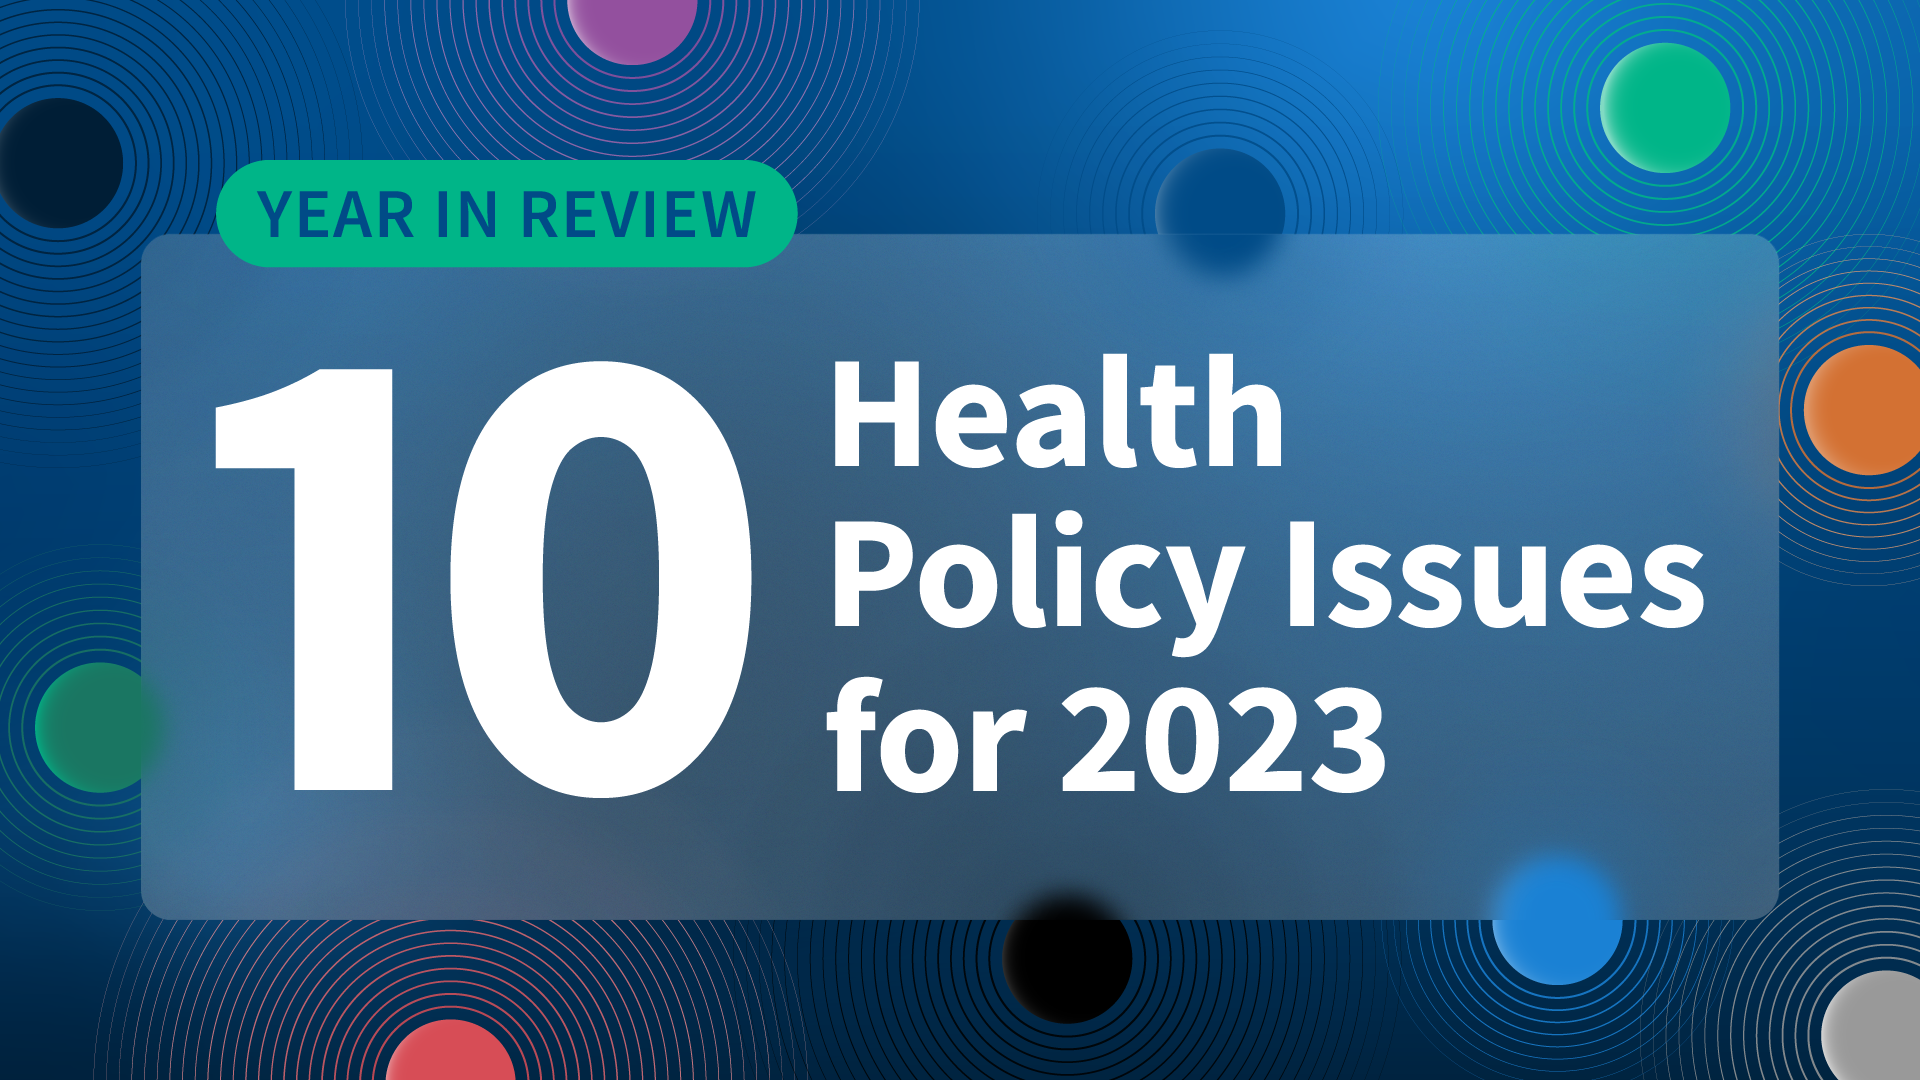 You are currently viewing Year in Review: 10 Health Policy Issues for 2023